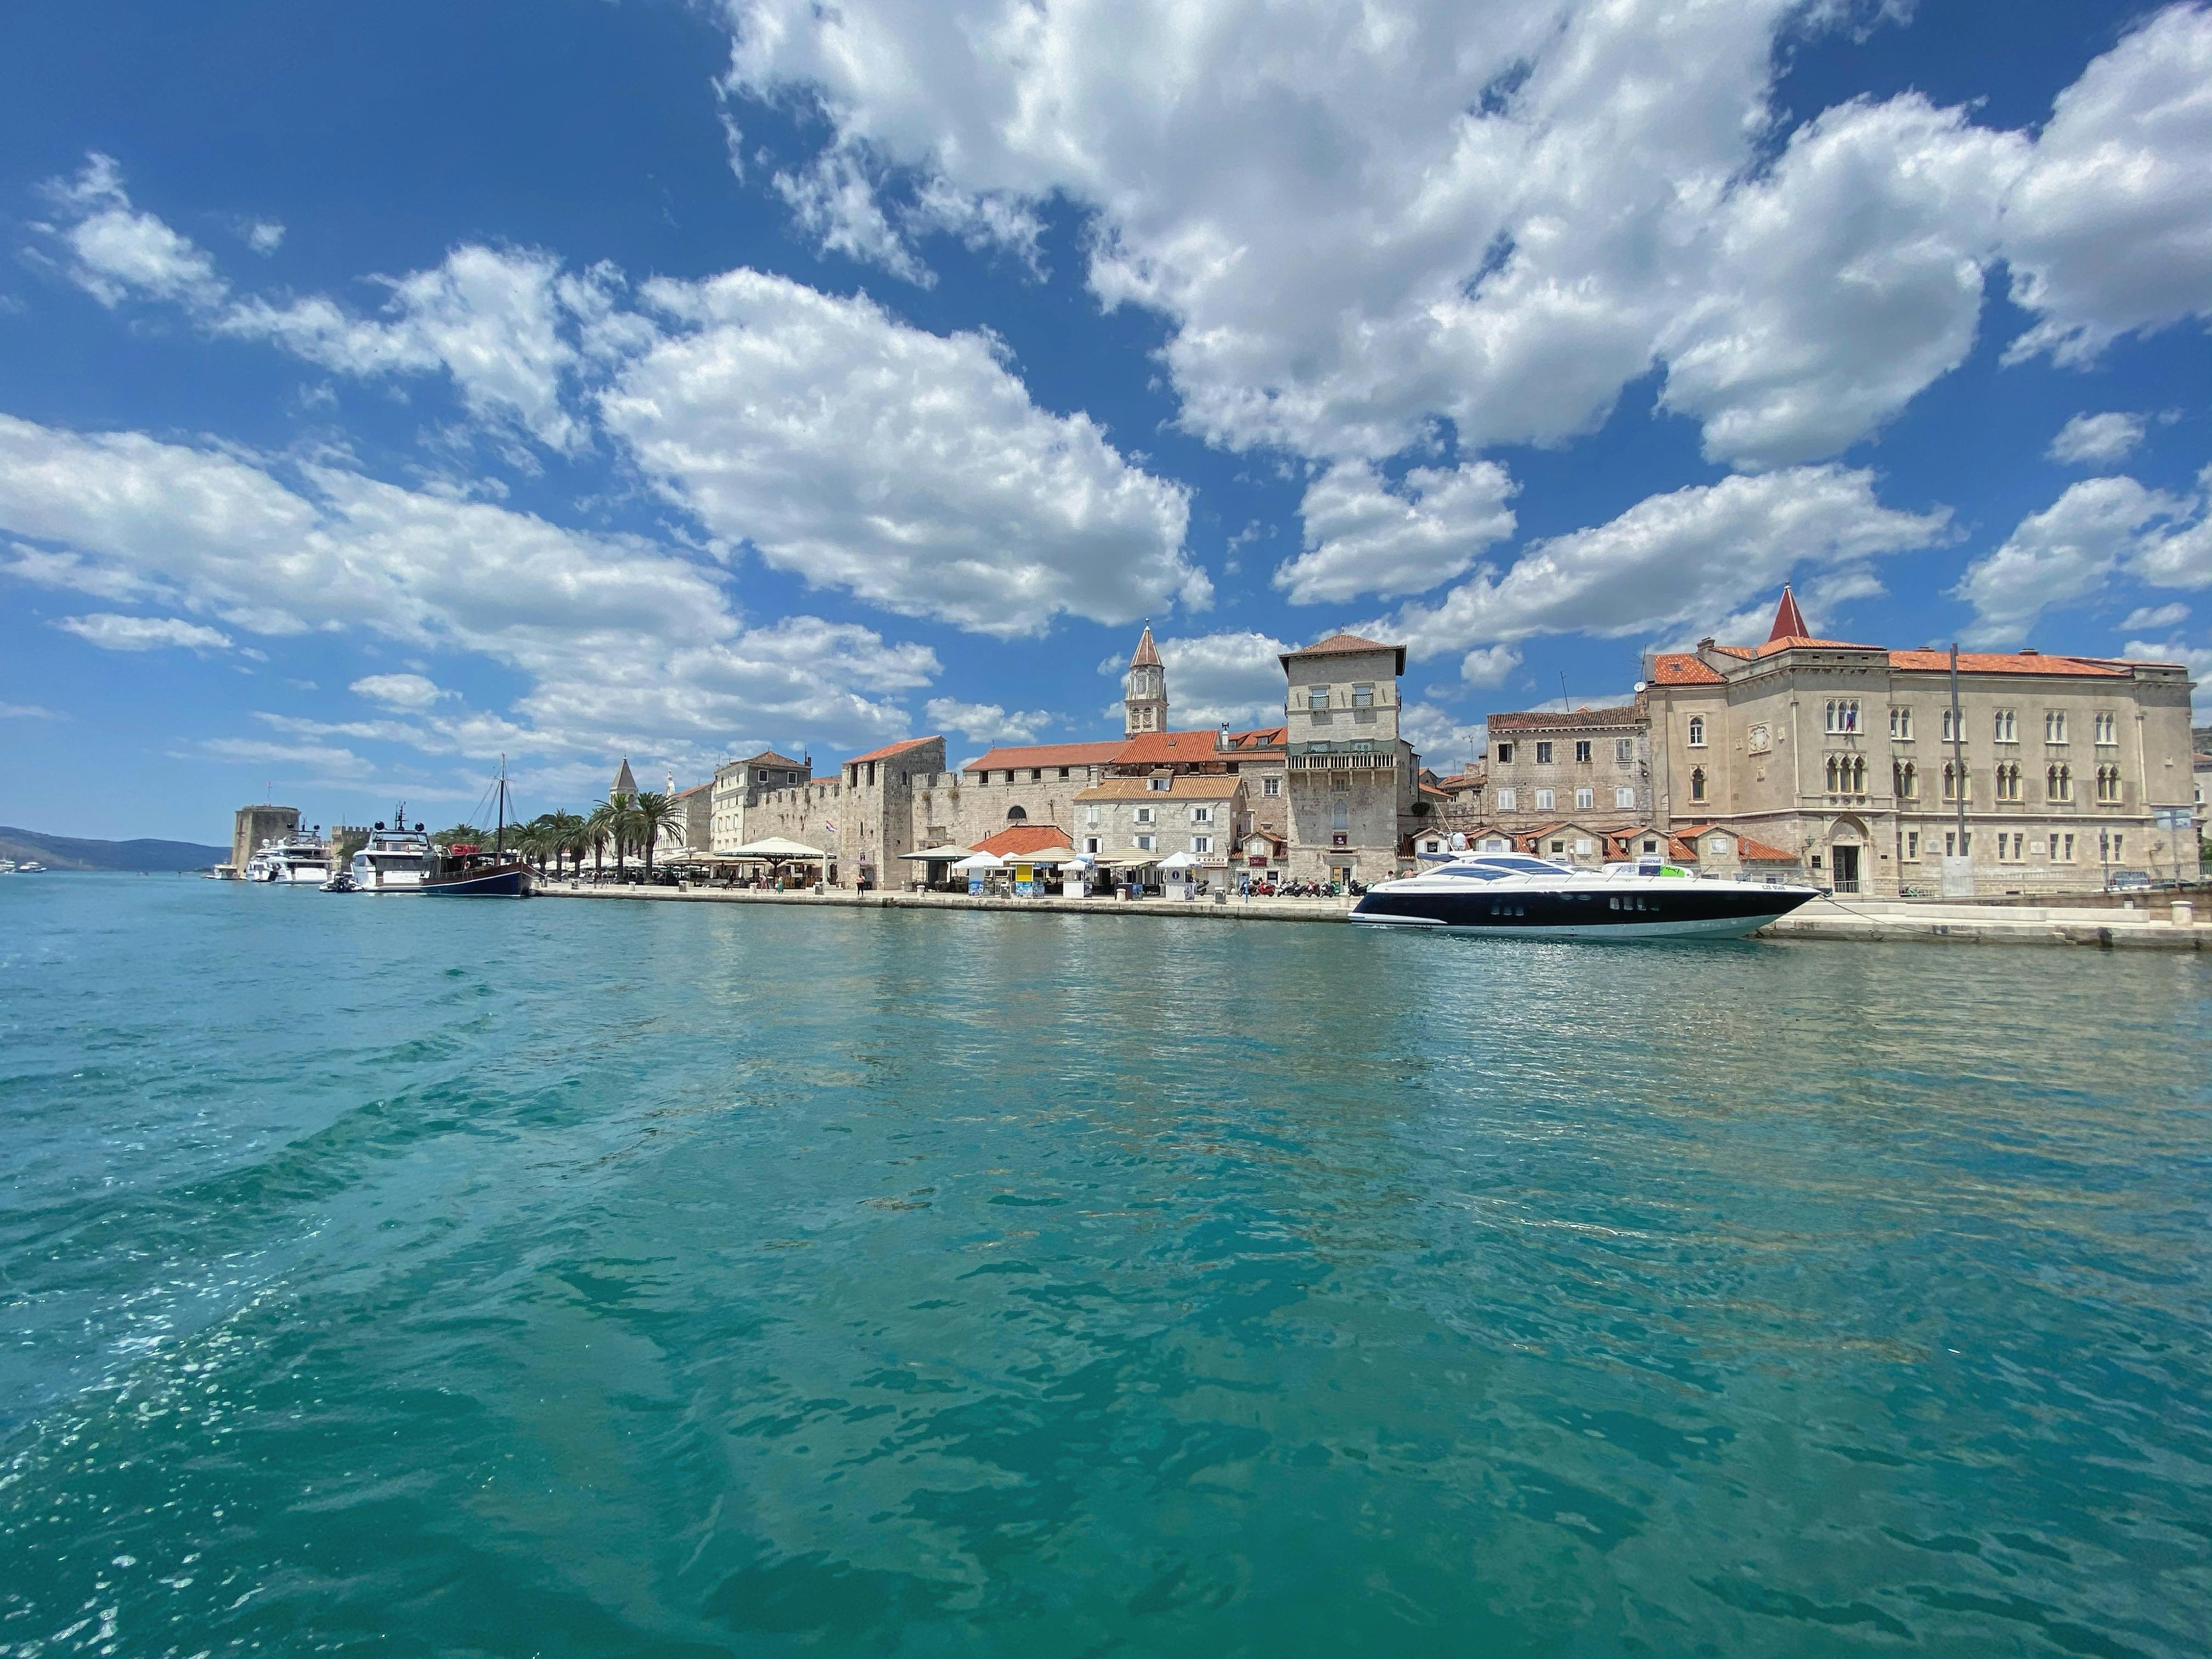 Private speedboat tour to Blue Lagoon from Split